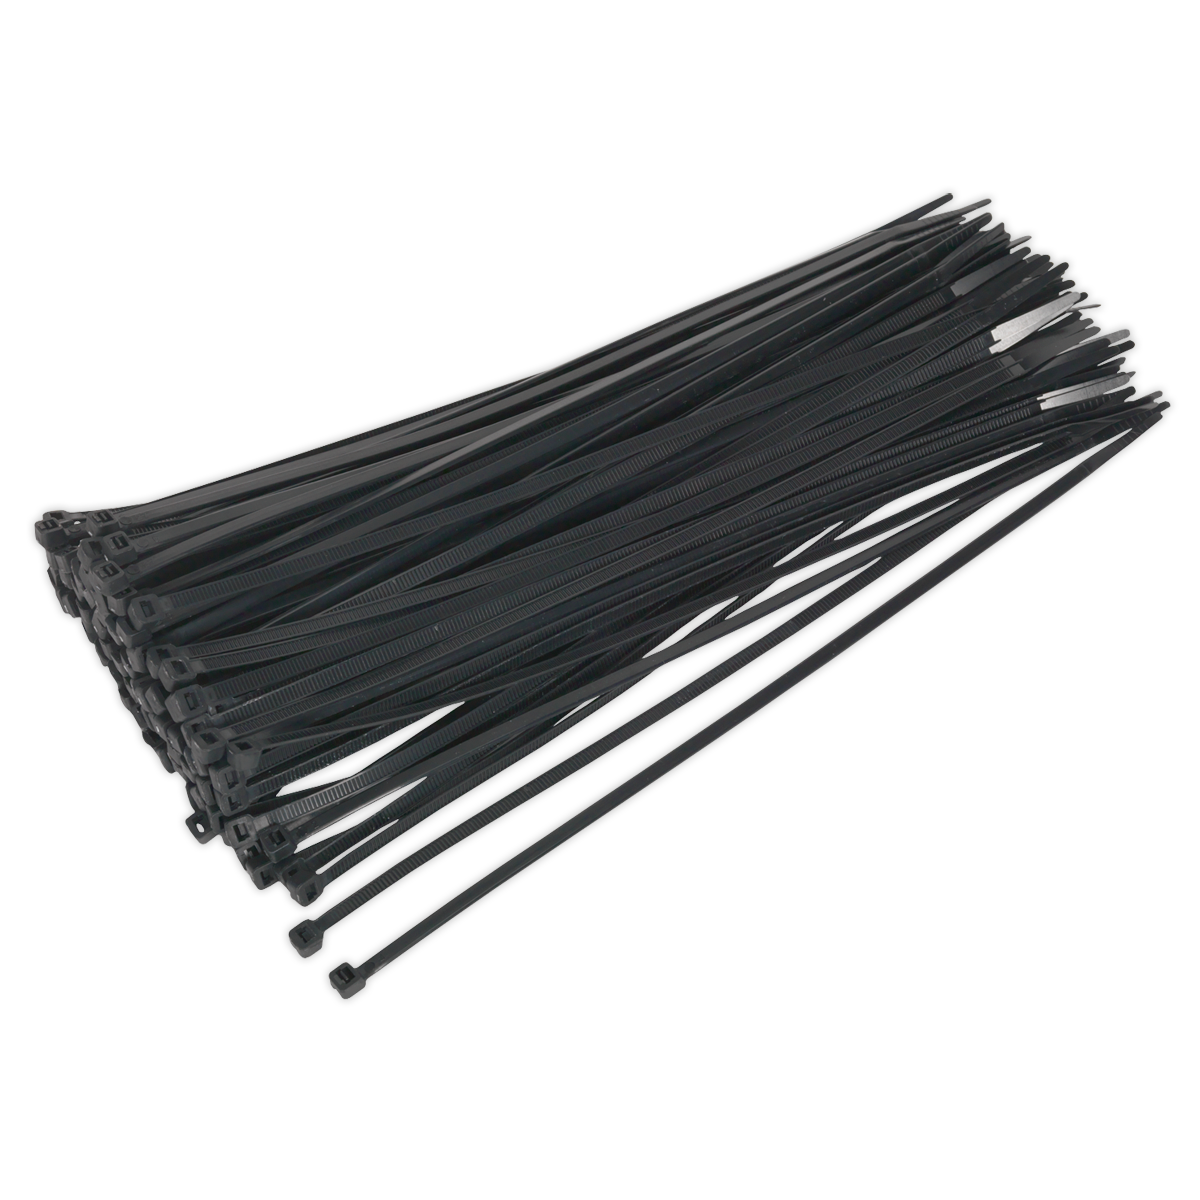 Cable Tie 300 x 4.8mm Black Pack of 100 - CT30048P100 - Farming Parts